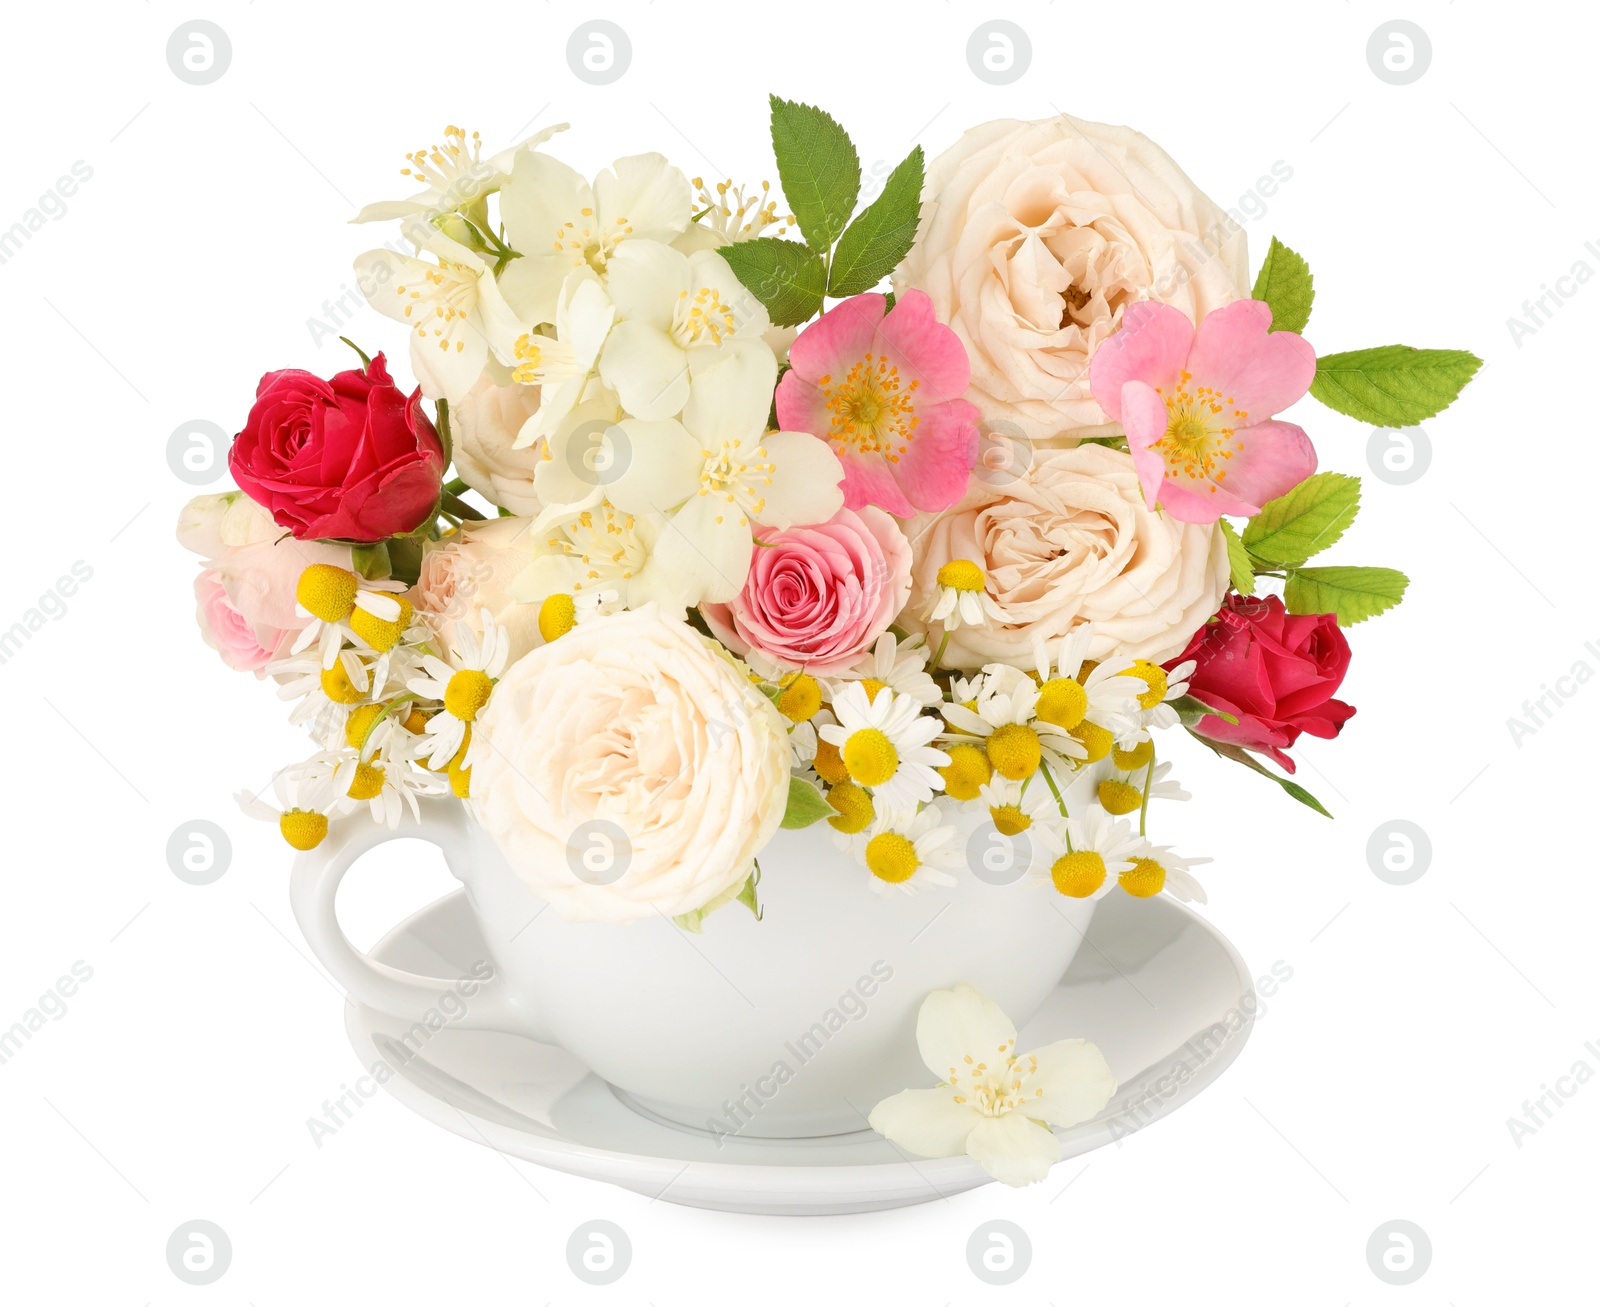 Photo of Aromatic herbal tea in cup with different flowers isolated on white